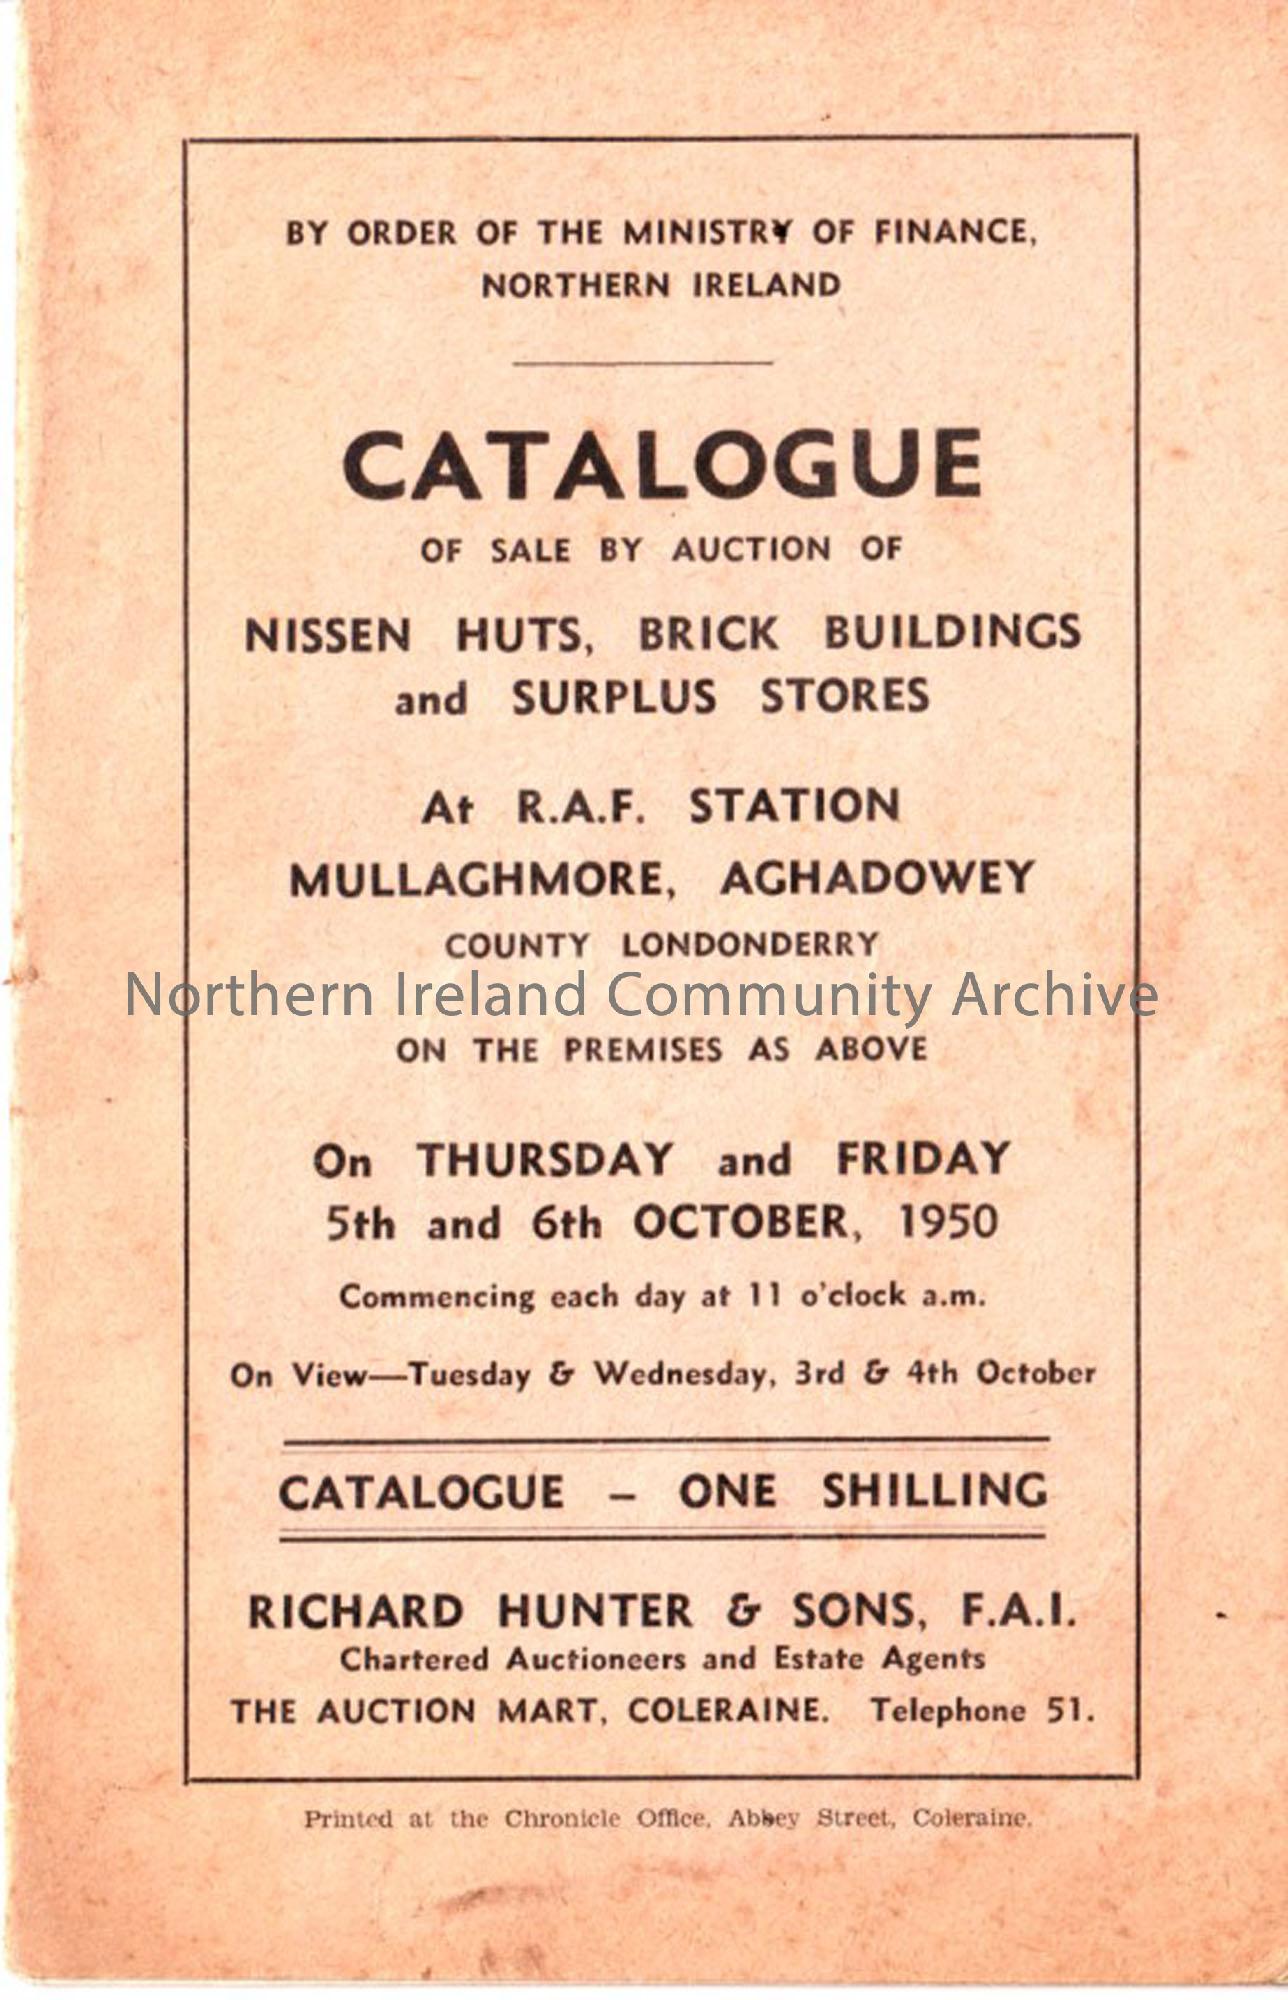 Catalogue of sale by auction of Nissen Huts, Brick buildings and surplus stores at R.A.F Station Mullaghmore, Aghadowey, county Londonderry on Thursda…